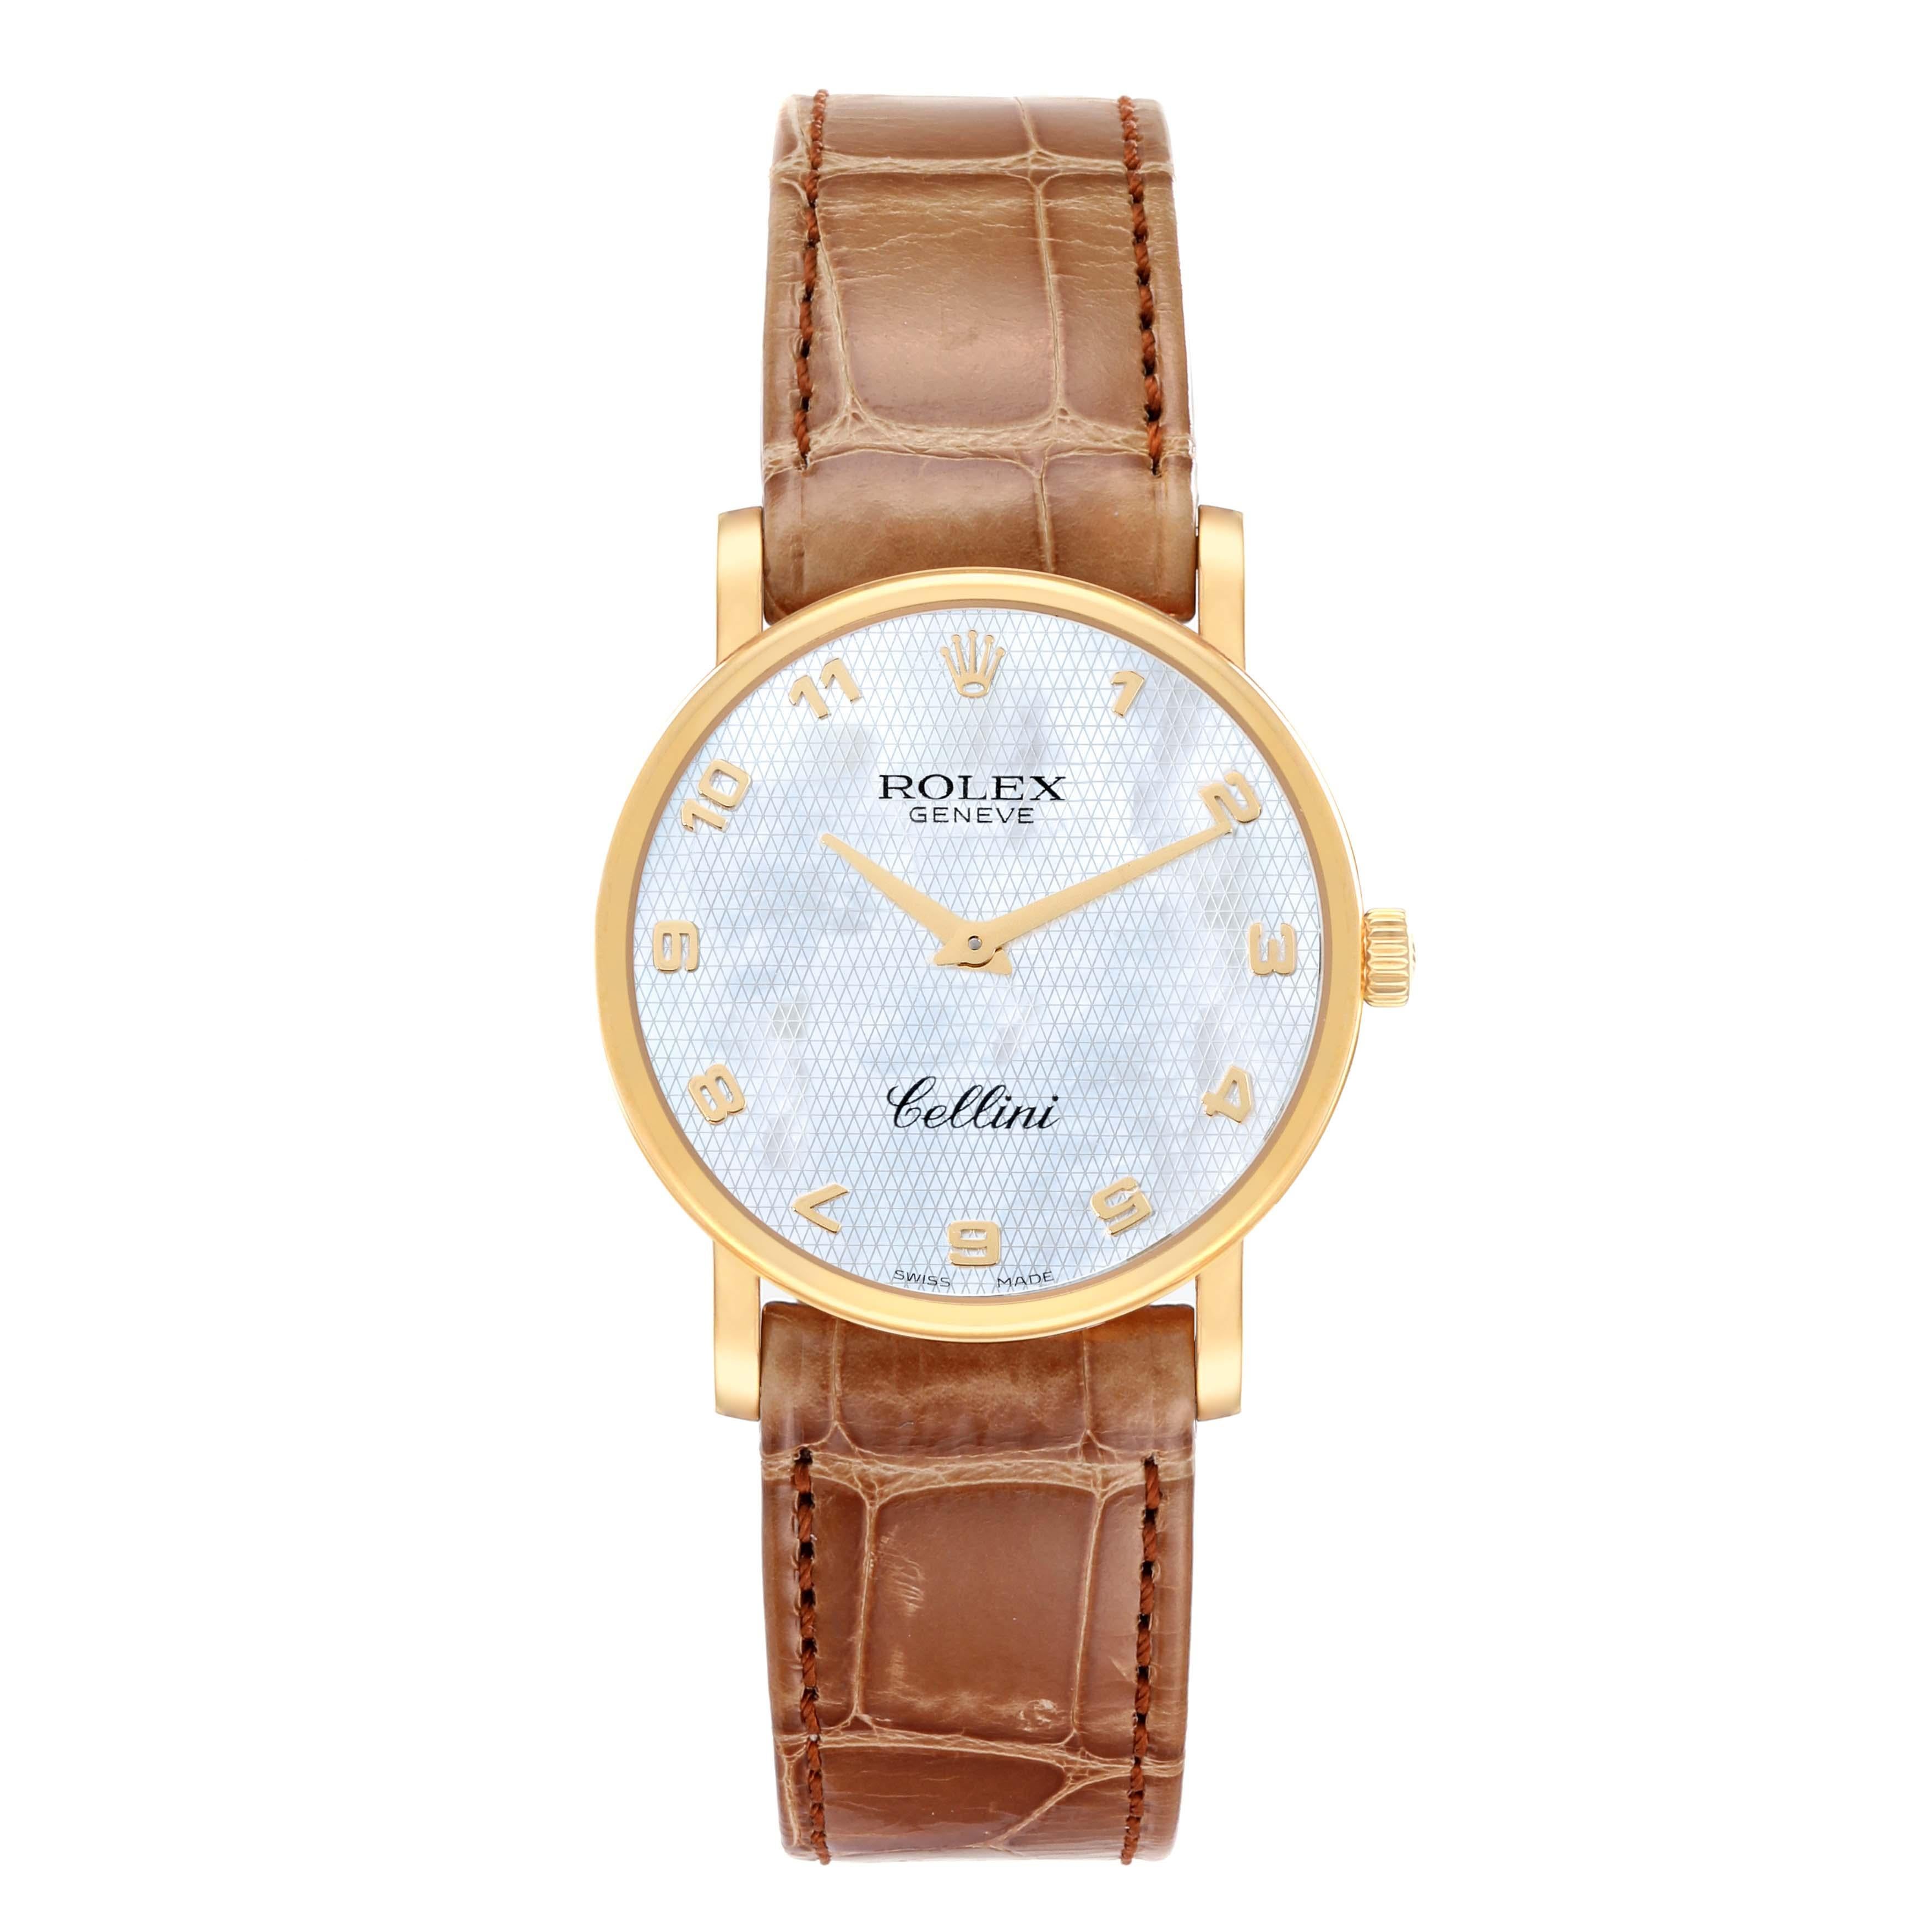 Rolex Cellini Classic Yellow Gold Mother Of Pearl Dial Mens Watch 5115 Unworn. Manual winding movement. 18k yellow gold slim case 31.8 x 5.5 mm in diameter. Rolex logo on the crown. . Scratch resistant sapphire crystal. Flat profile. Textured mother